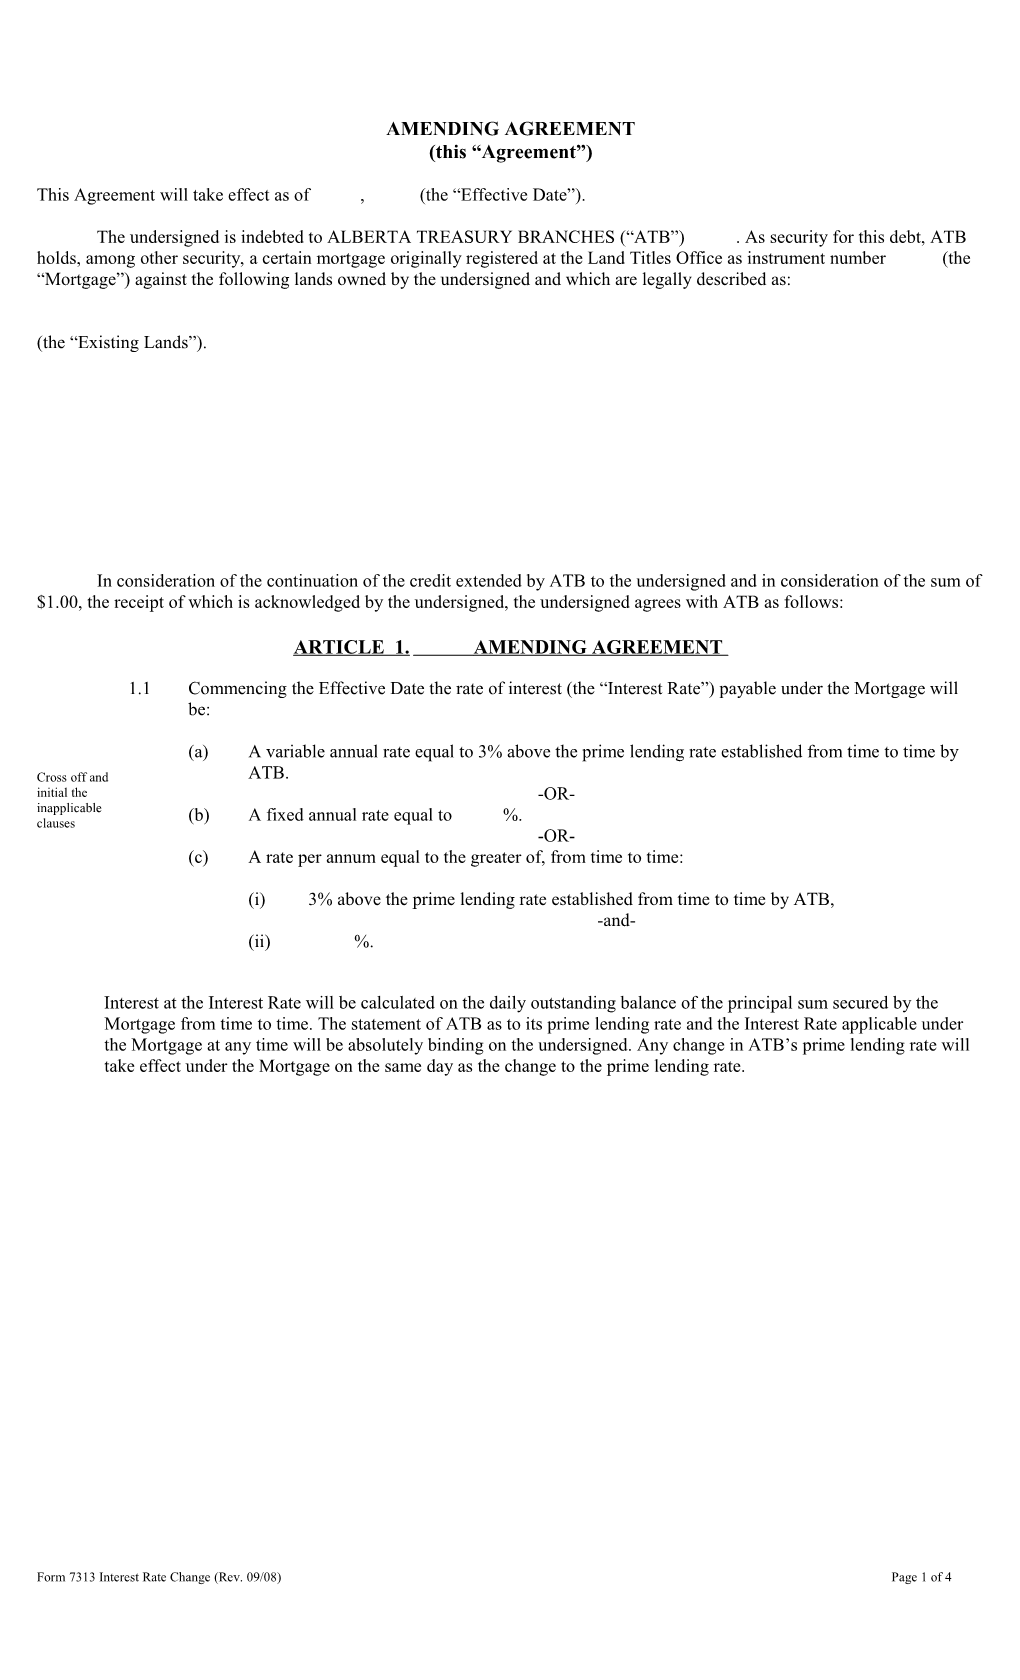 7313 - Amending Agreement - Interest Rate Change